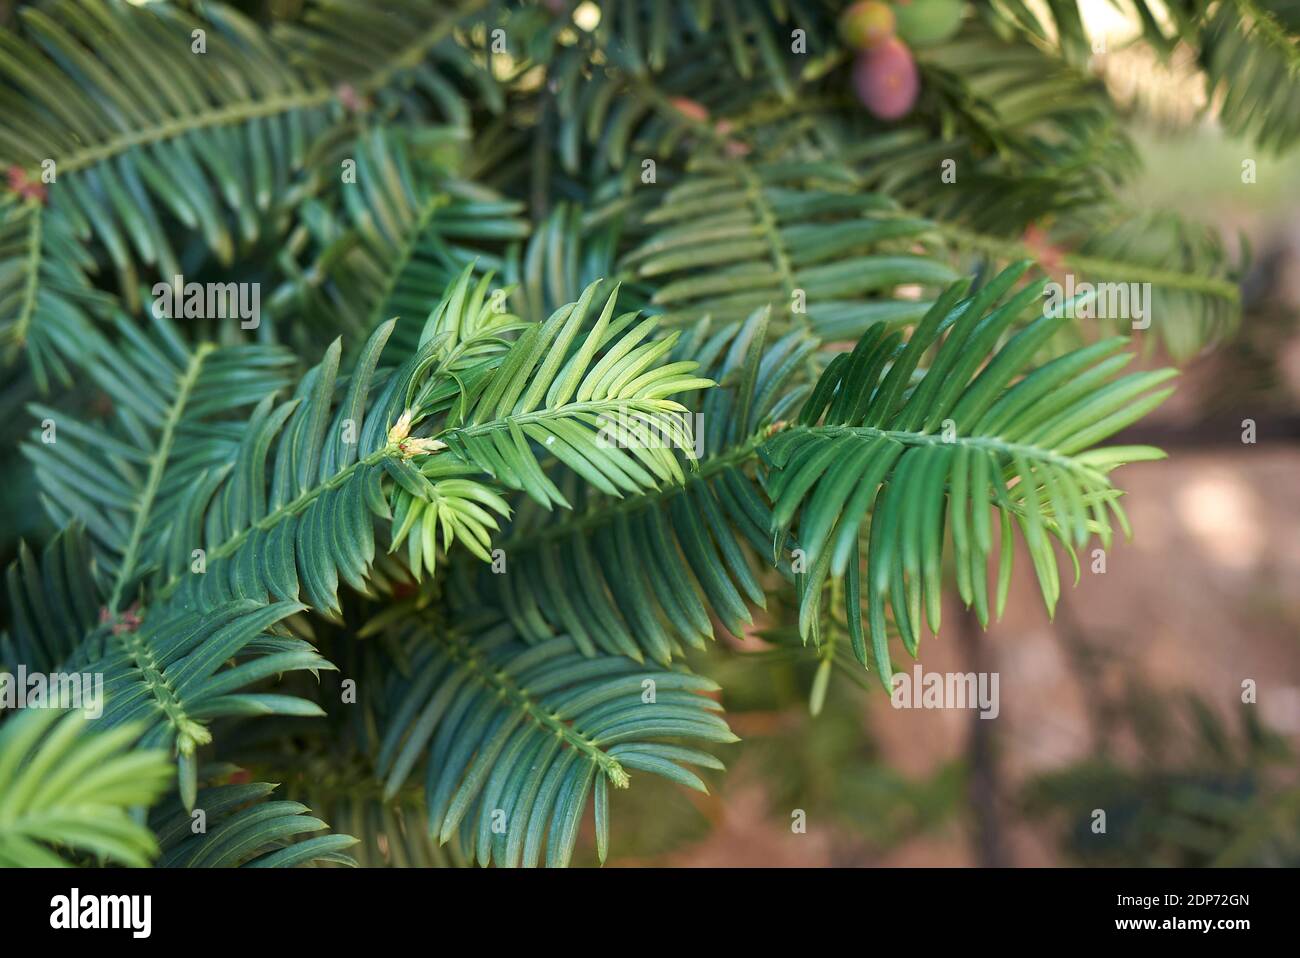 Taxus baccata leaves and seeds Stock Photo